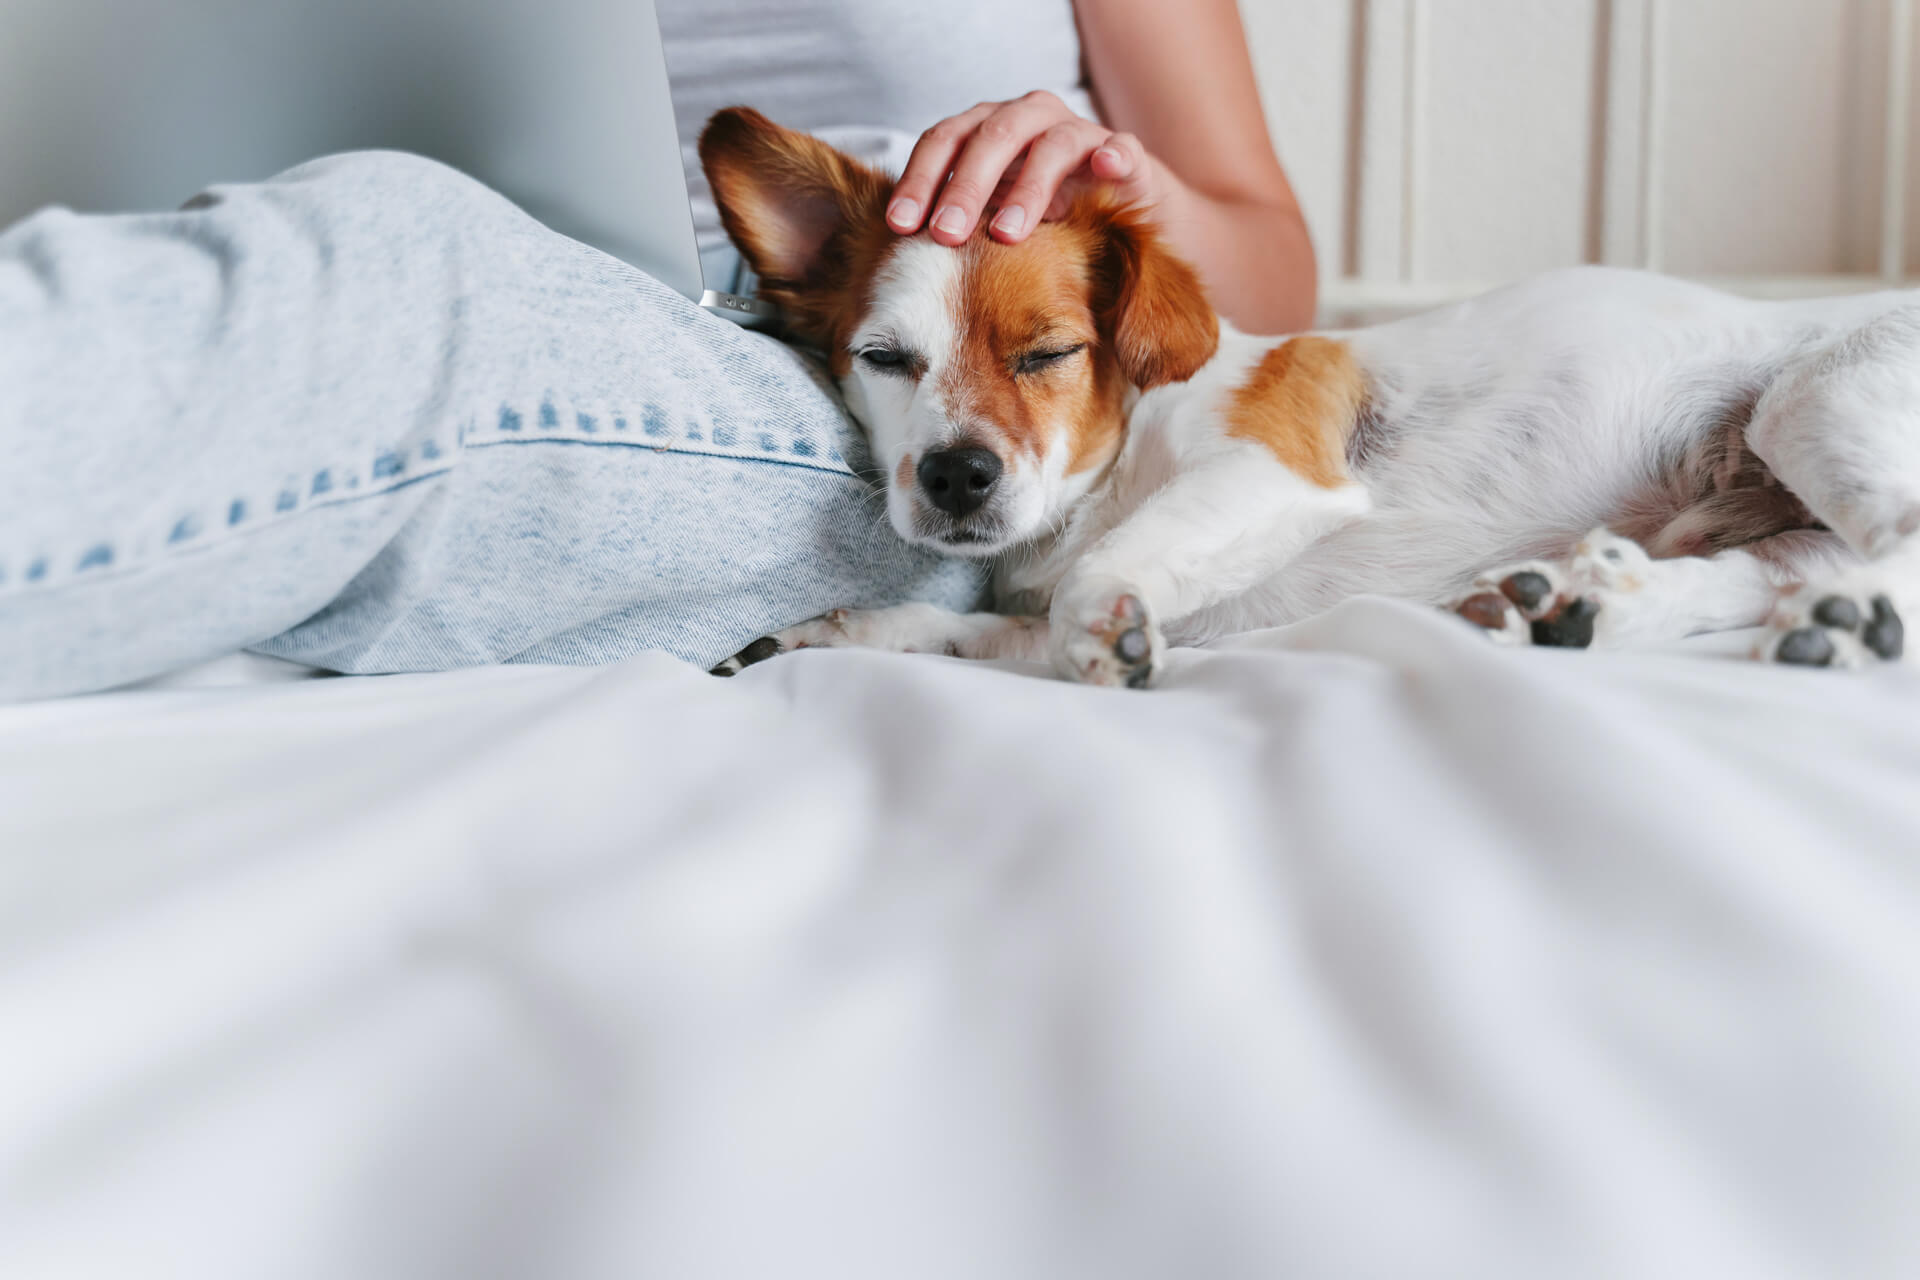 dog on bonfire night on bed inside with woman